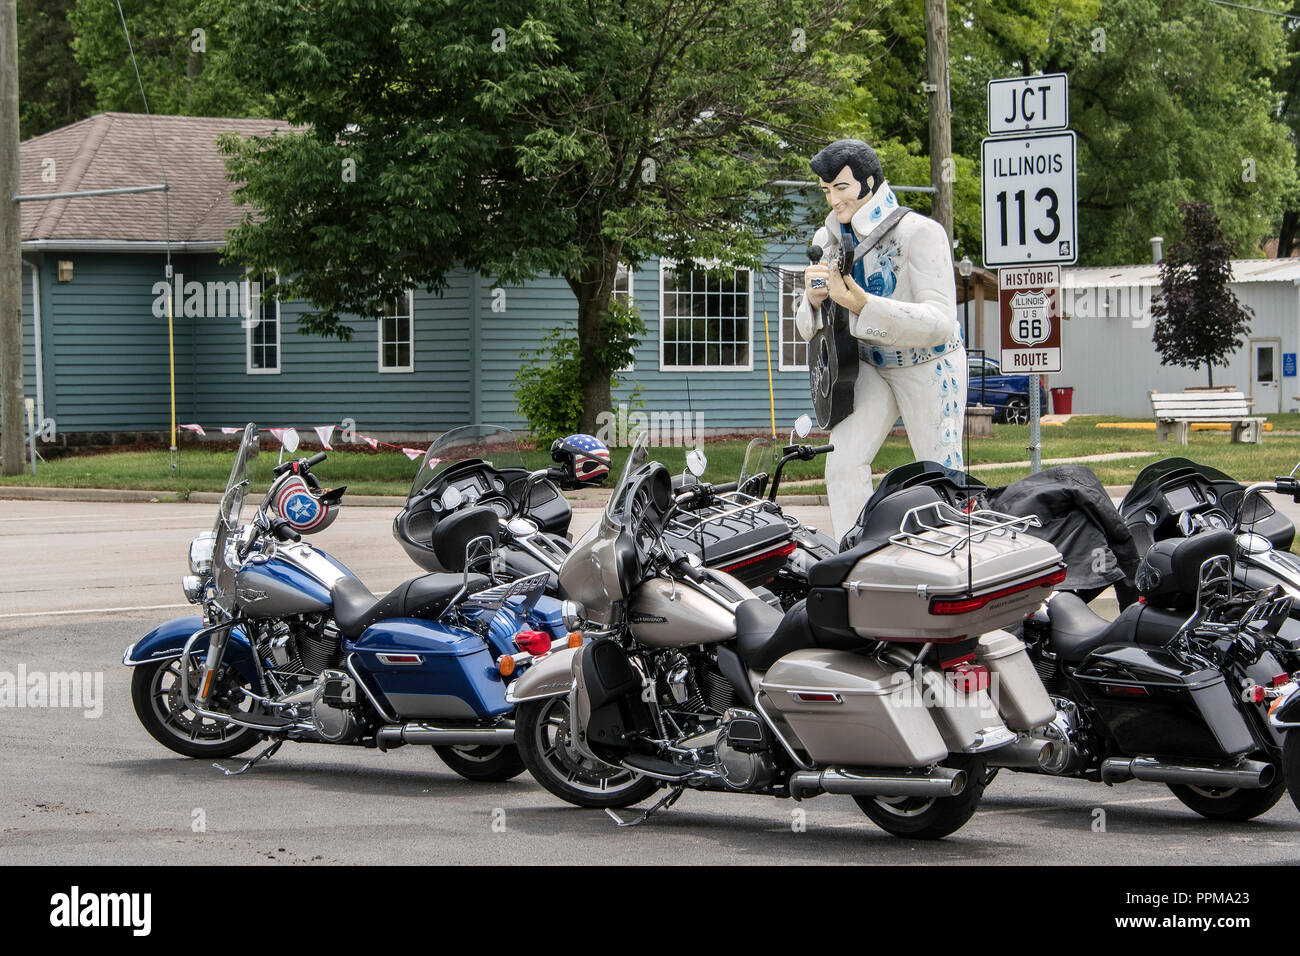 Route 66 Road Biker High Resolution Stock Photography and Images - Alamy